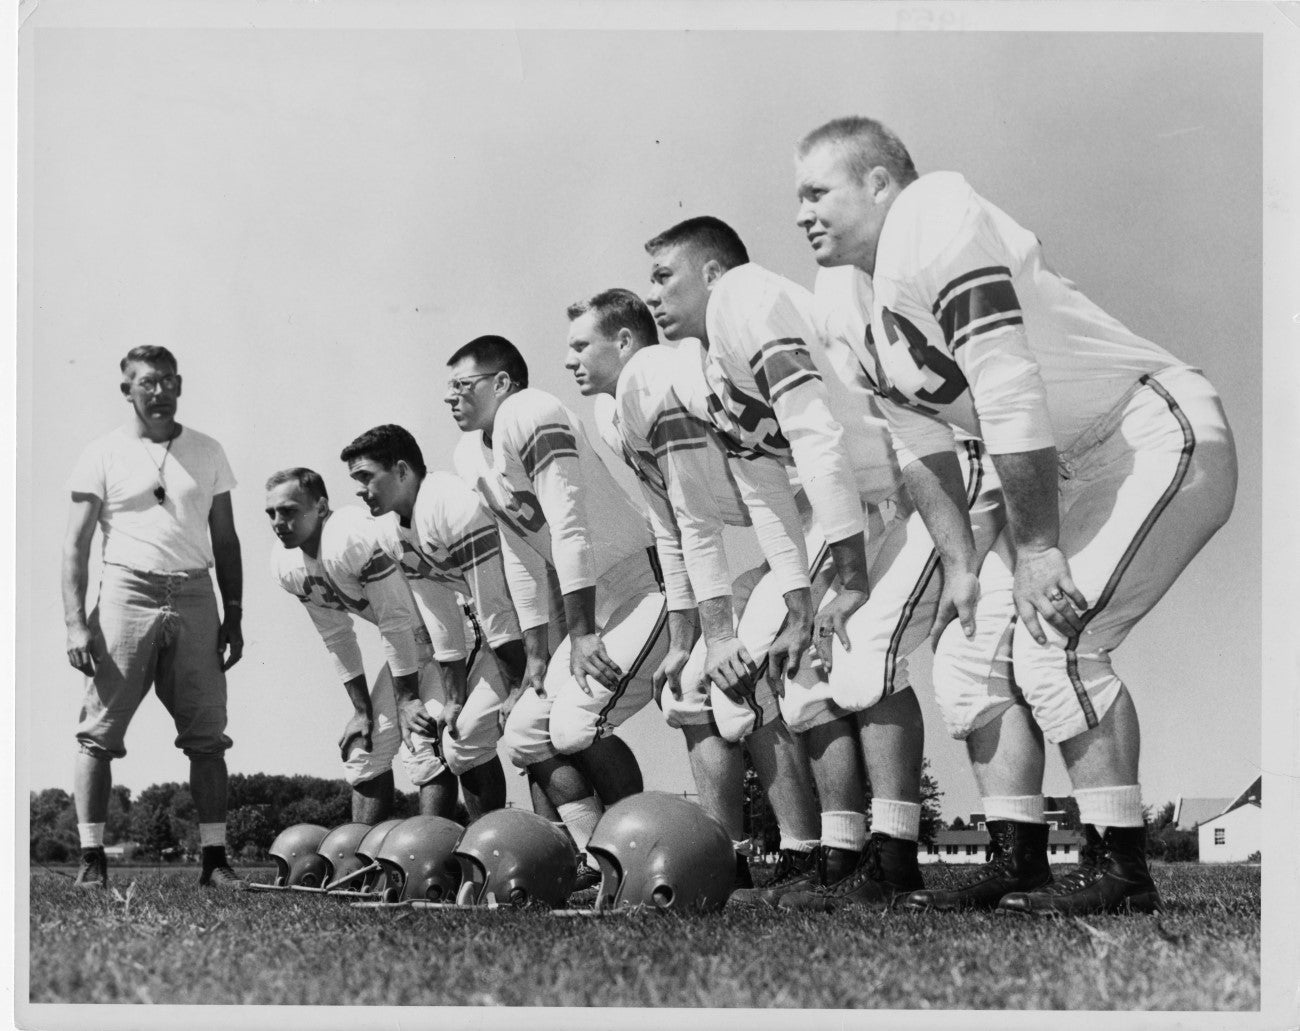 Football players from 1949 in position